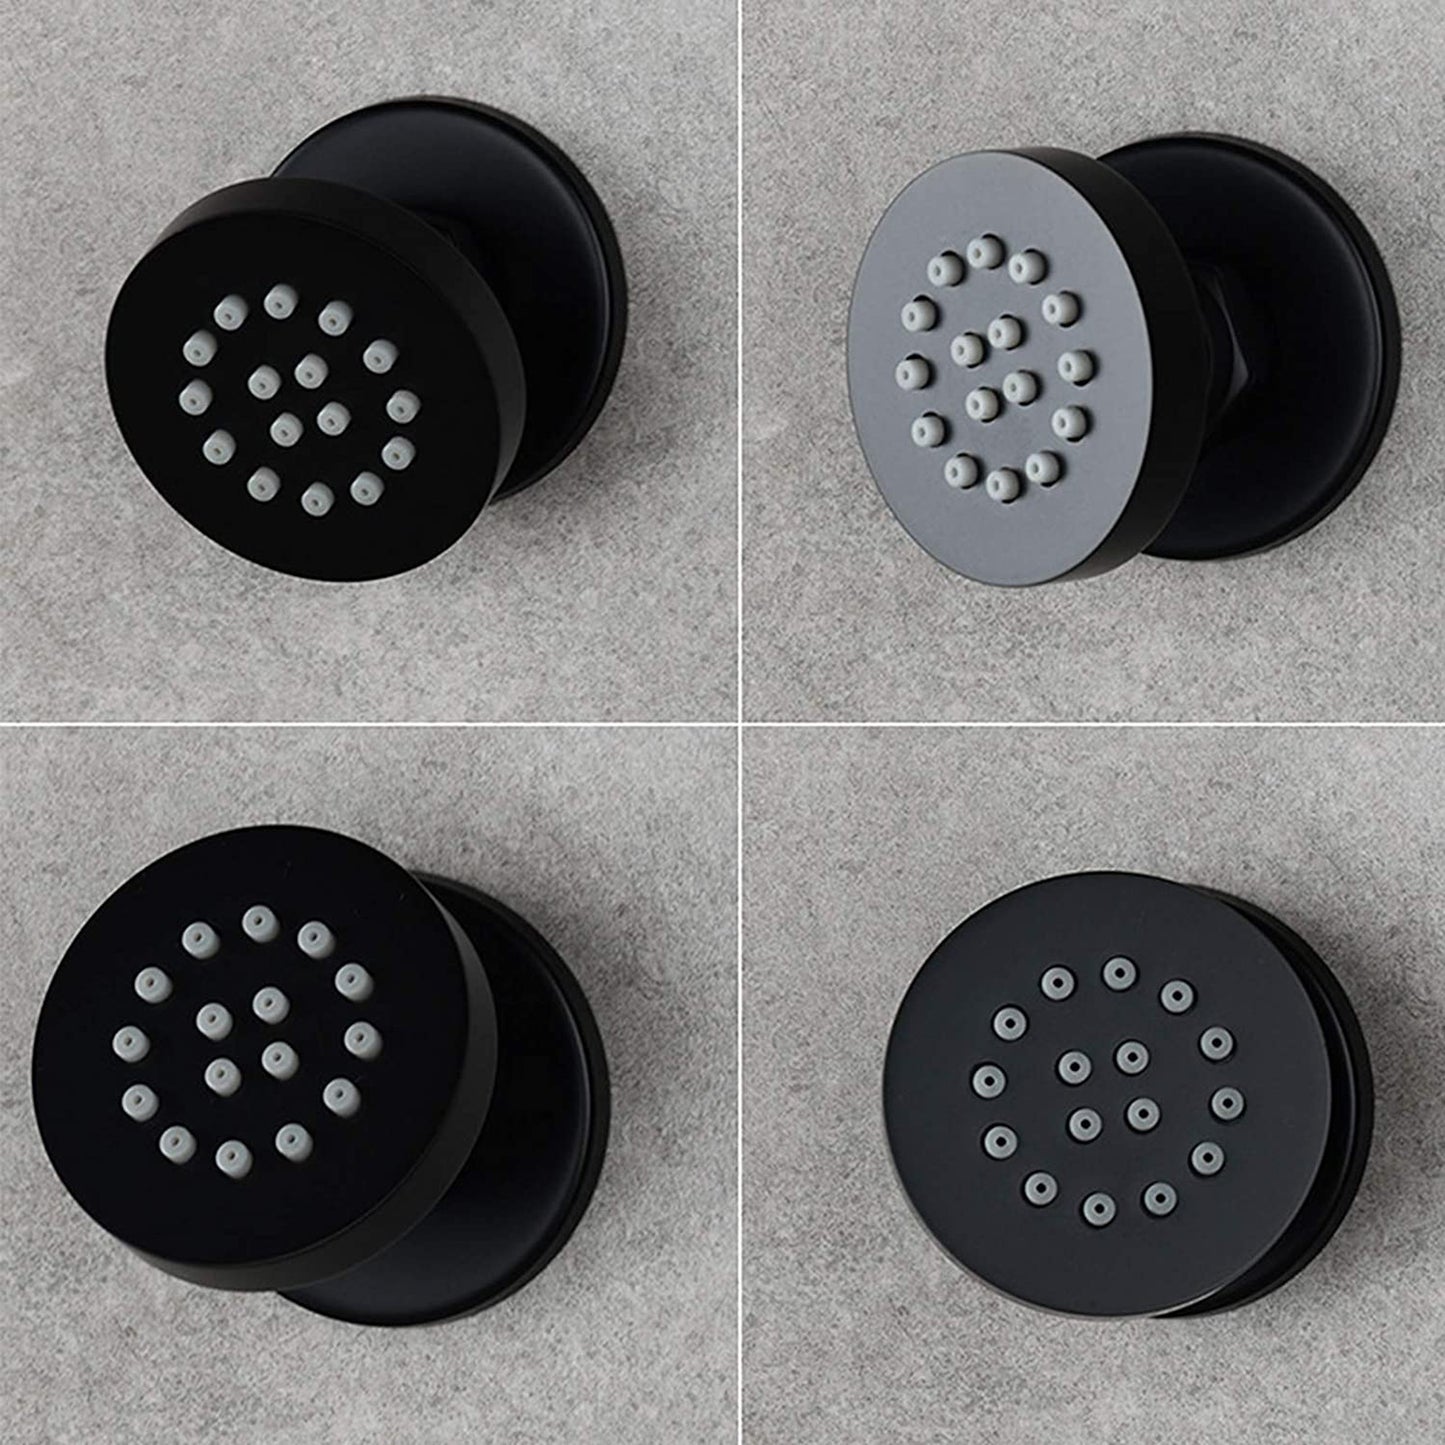 Venice Contemporary Round Concealed Thermostatic Shower Set Incl. Triple Diverter Valve, Wall Fixed 8" Shower Head, Slider Rail Kit, 4 Body Jets - Black (3 Outlet)